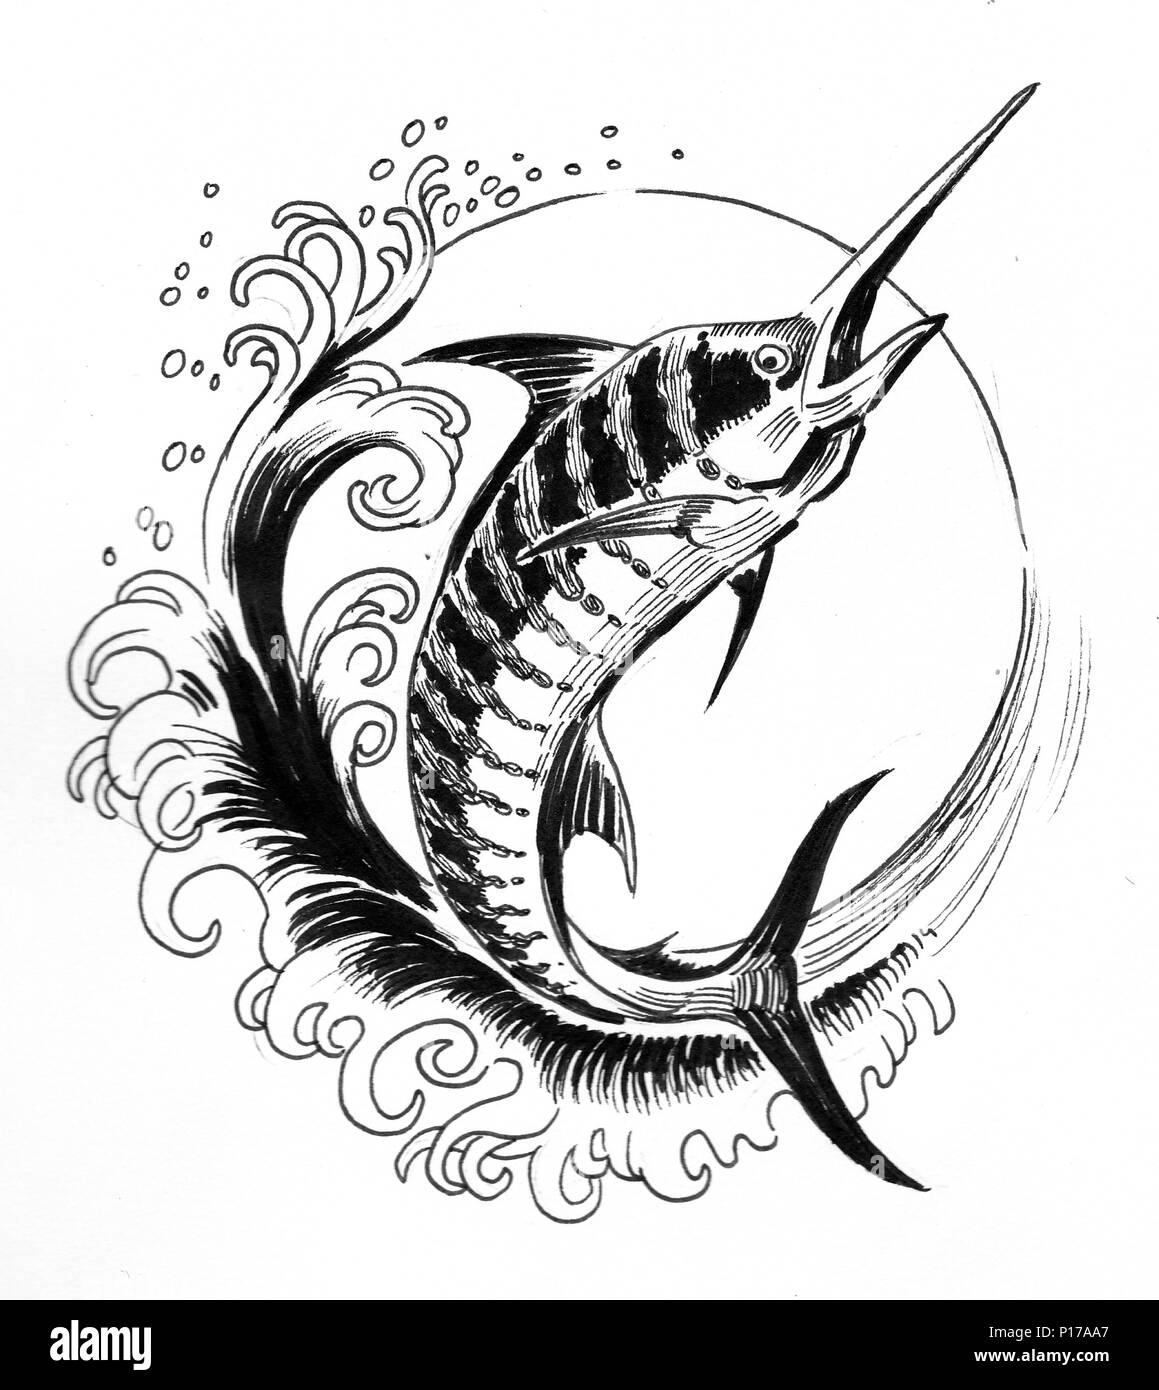 Swordfish in the sea wave. Ink black and white drawing Stock Photo